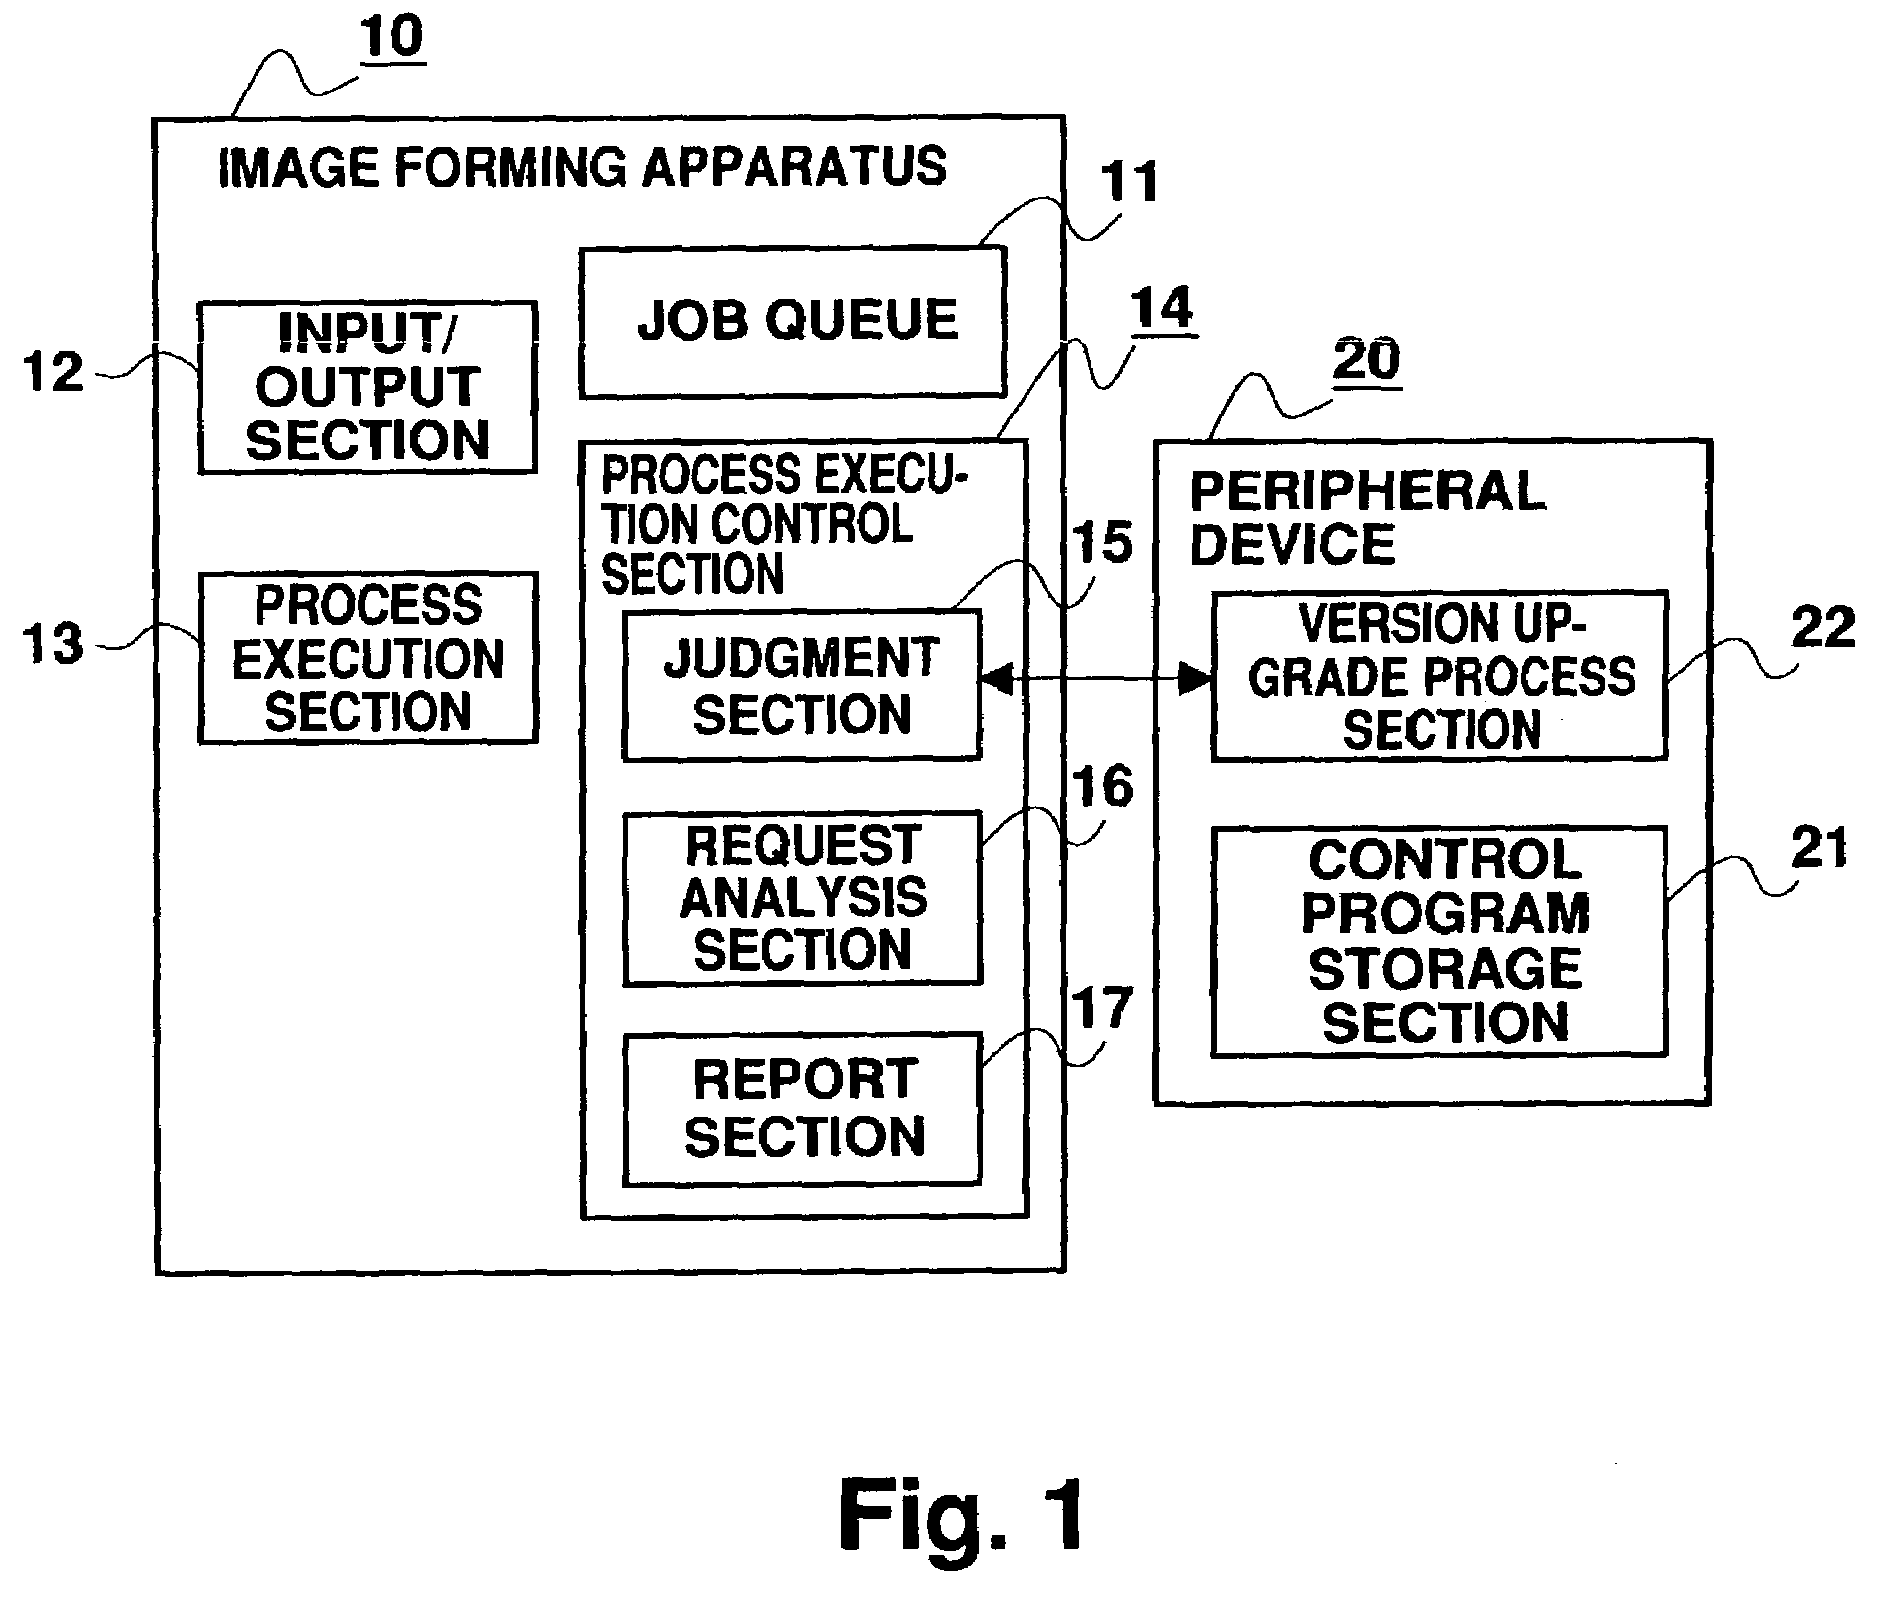 Image forming system with peripheral device and version upgrade process